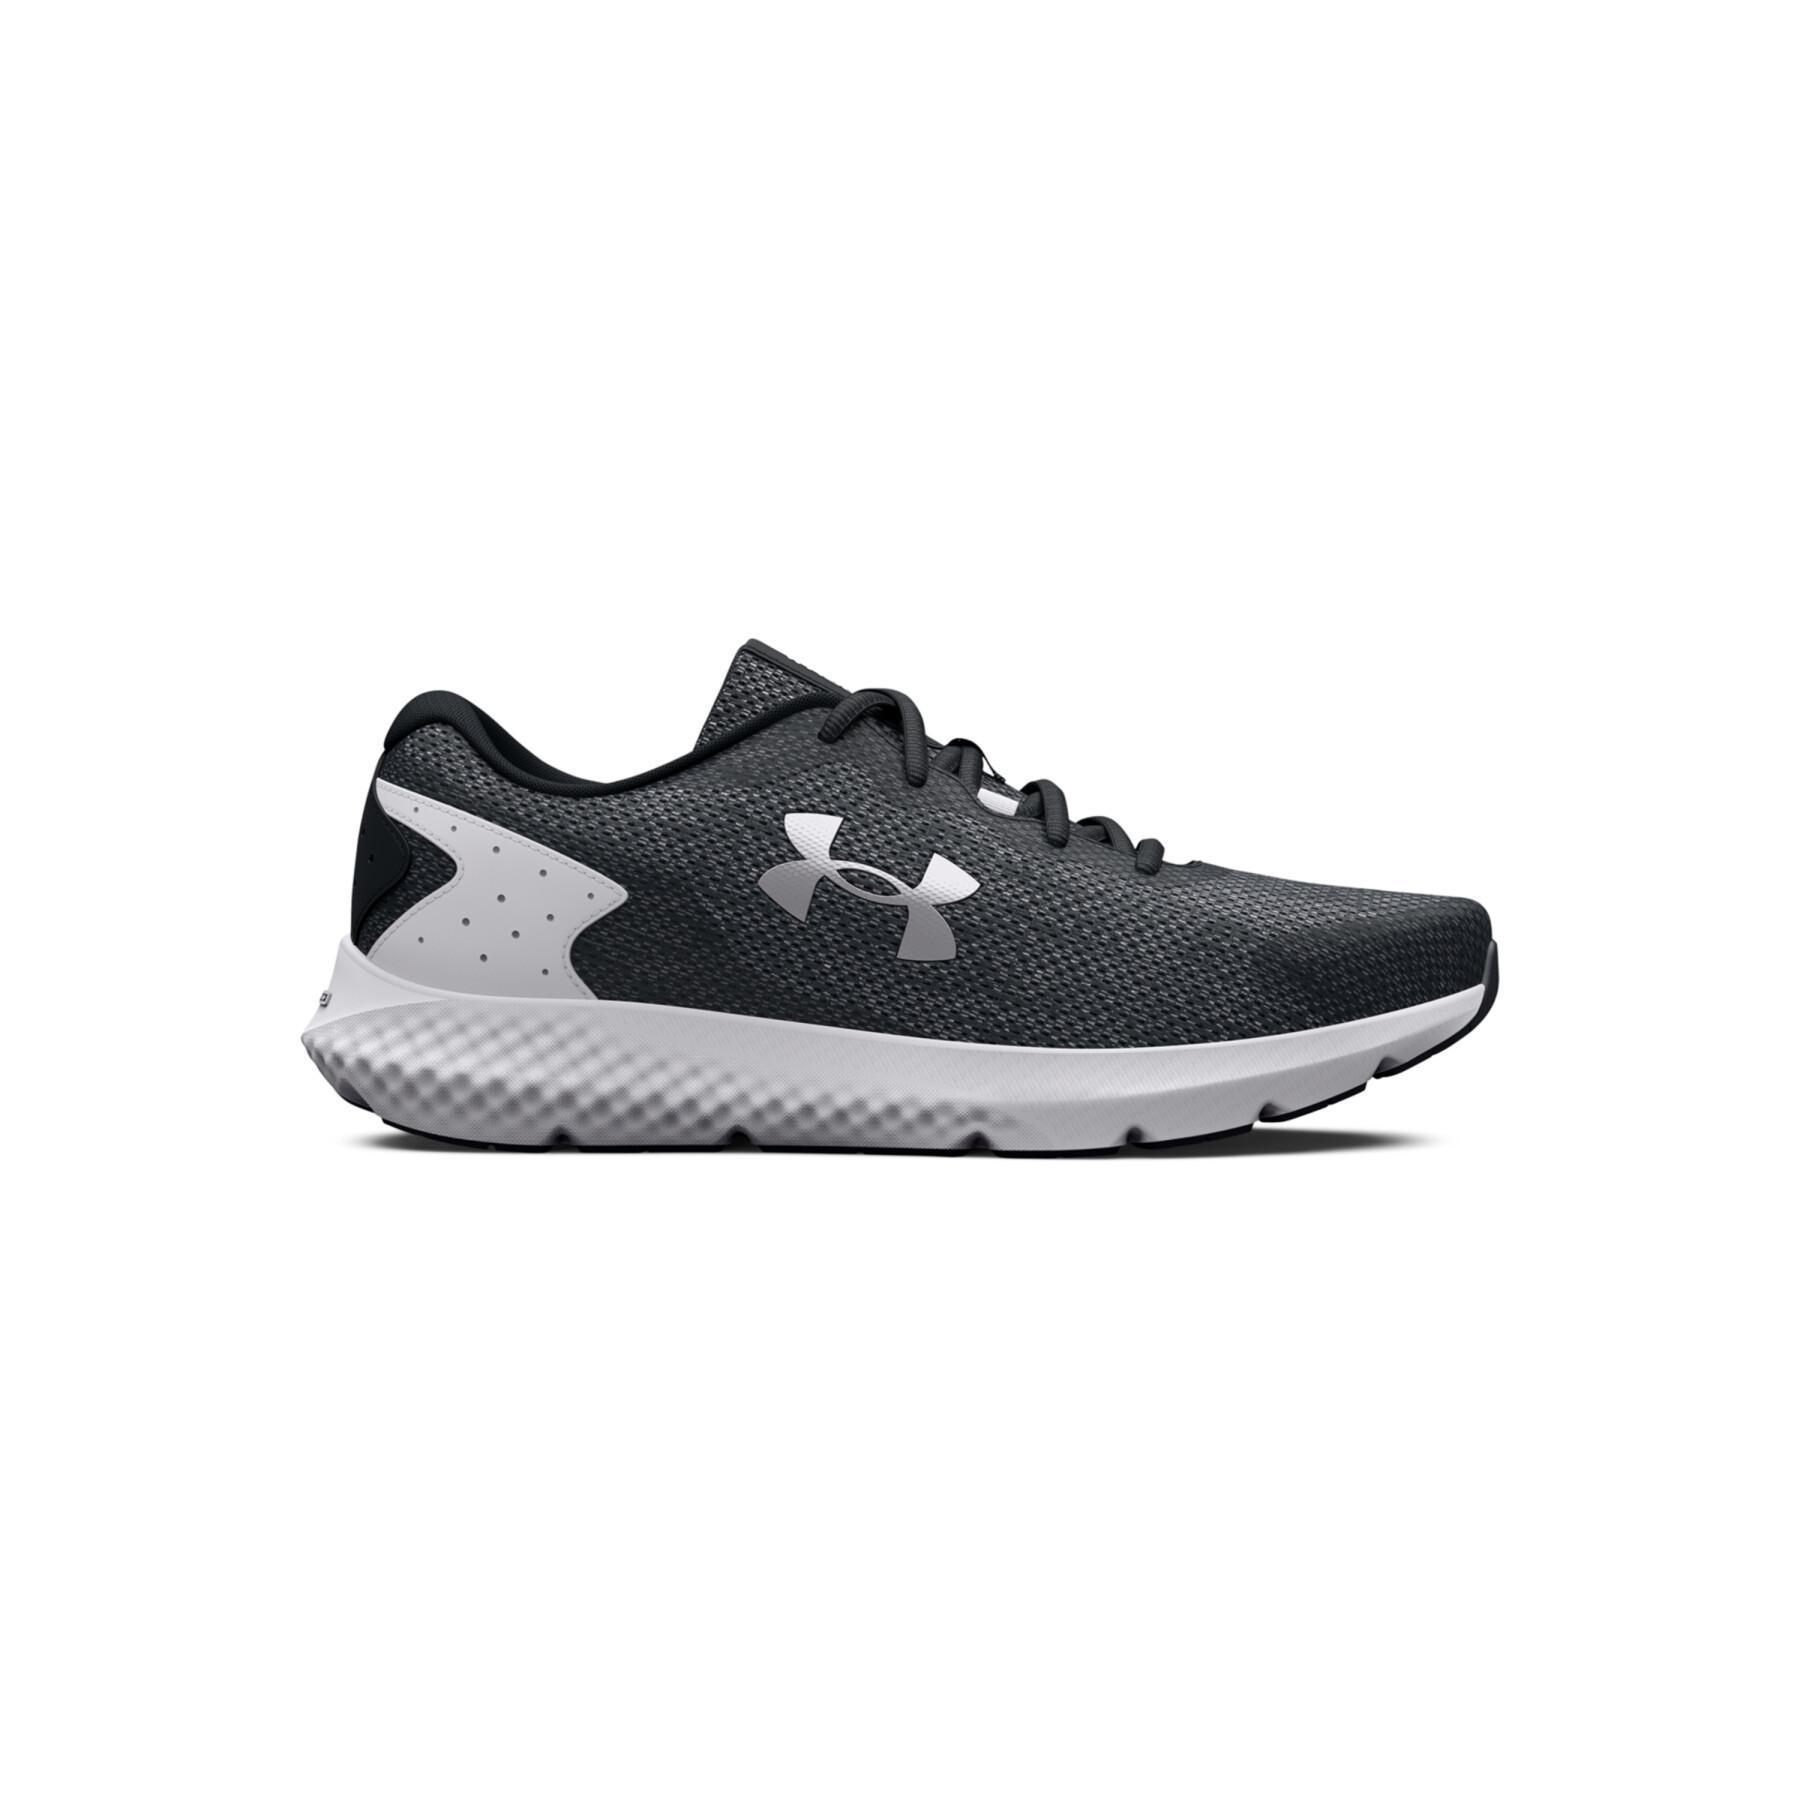 Chaussures de running femme Under Armour Charged Rogue 3